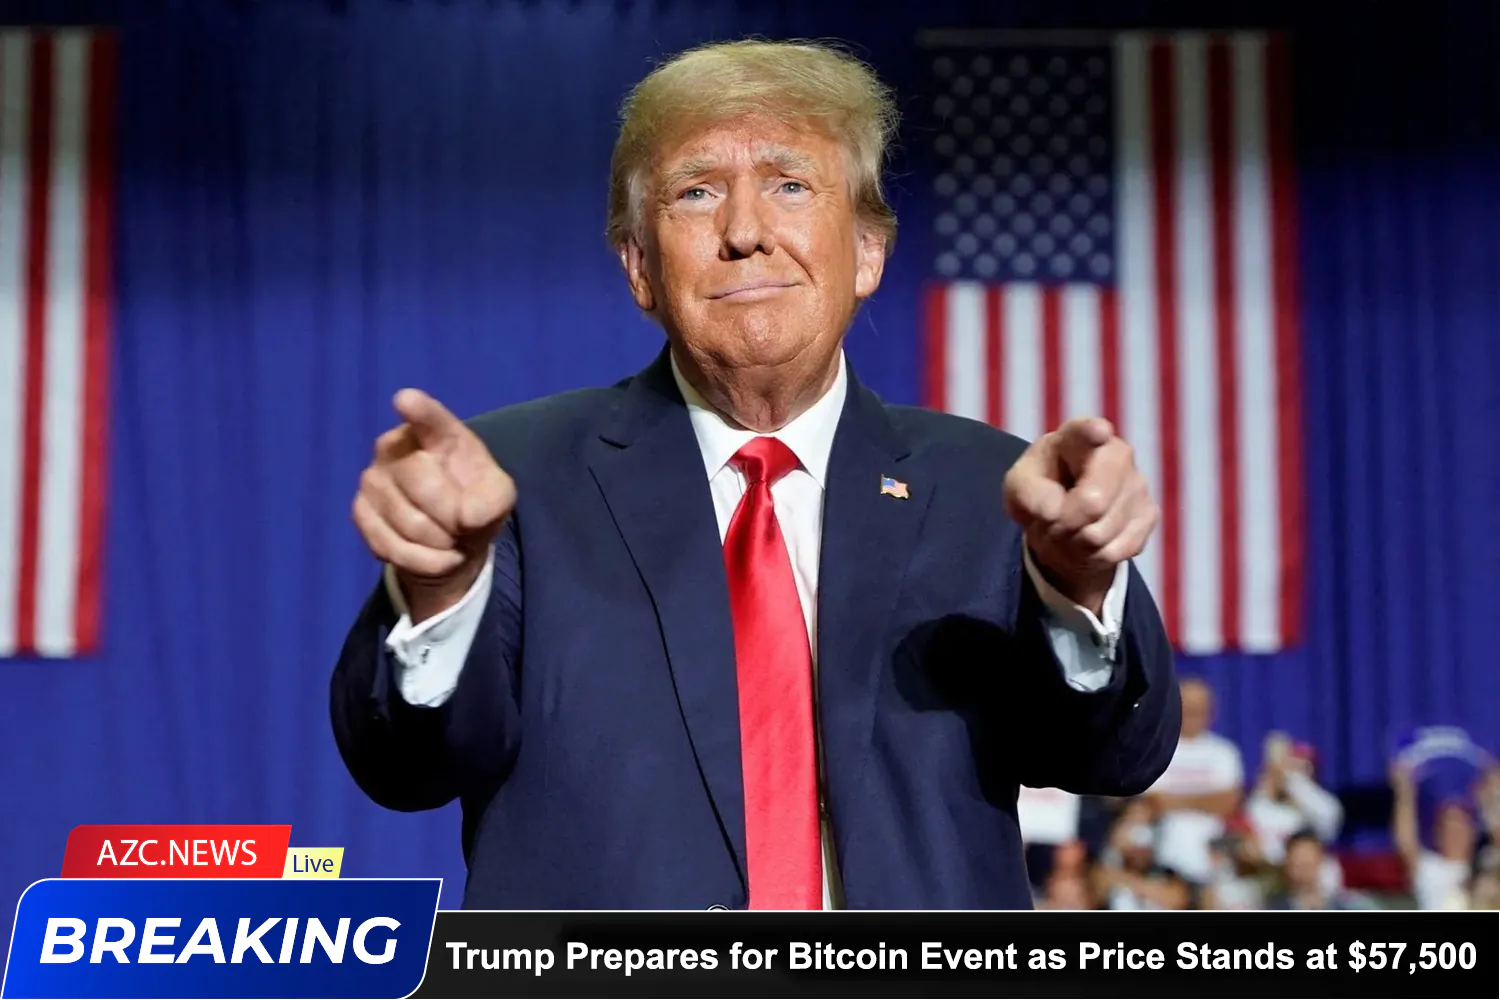 Azcnews Trump Prepares For Bitcoin Event As Price Stands At $57,500